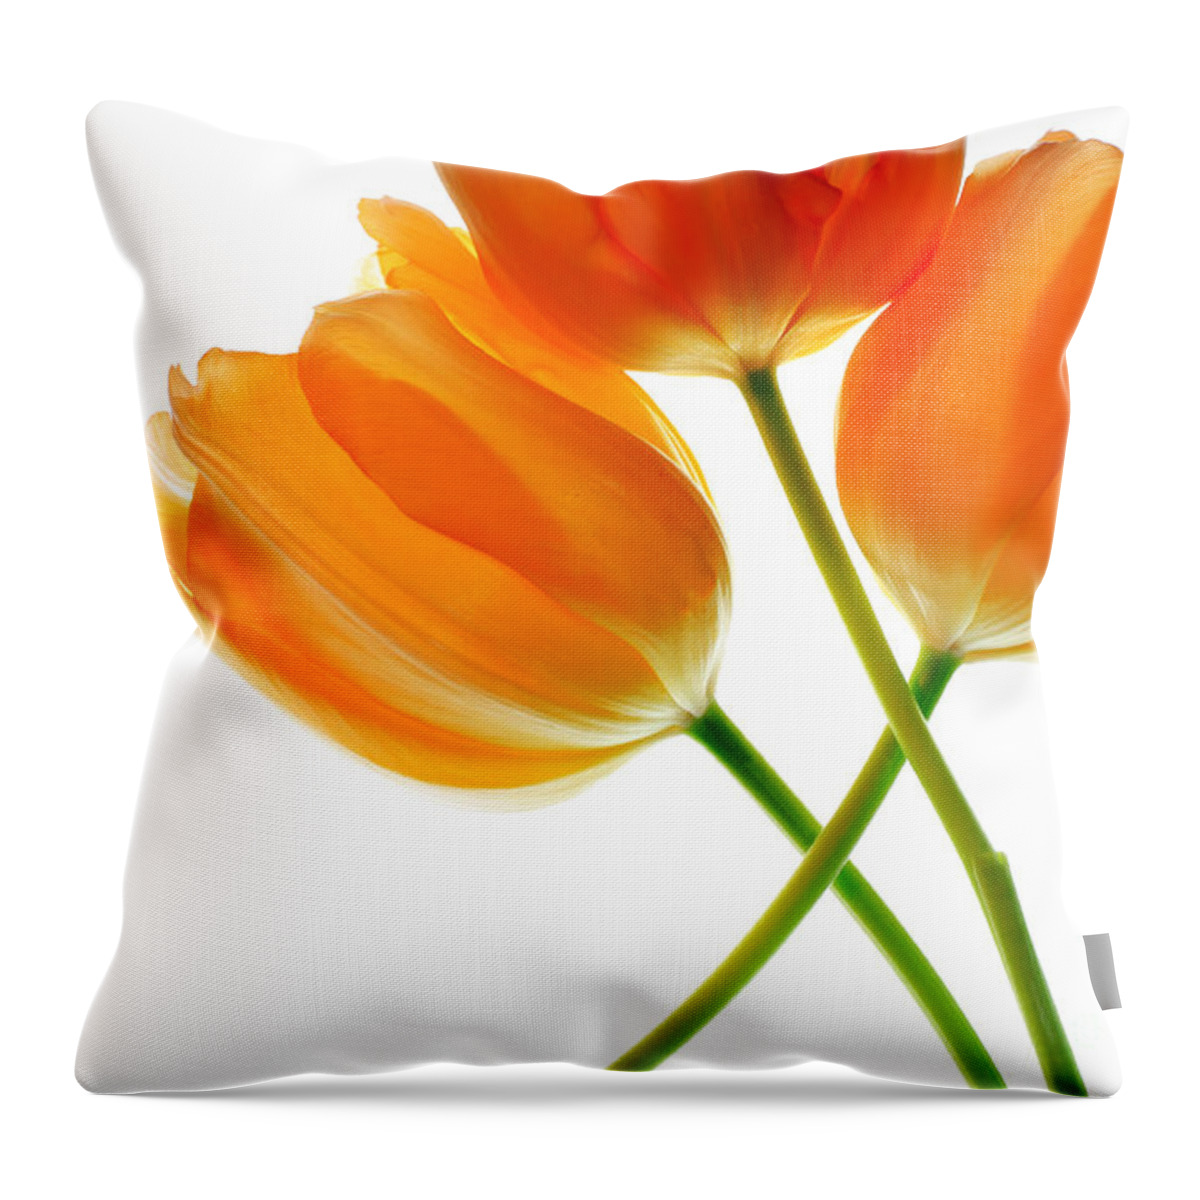 Tulip Throw Pillow featuring the photograph Three Orange Tulip Flowers 4 by Charline Xia